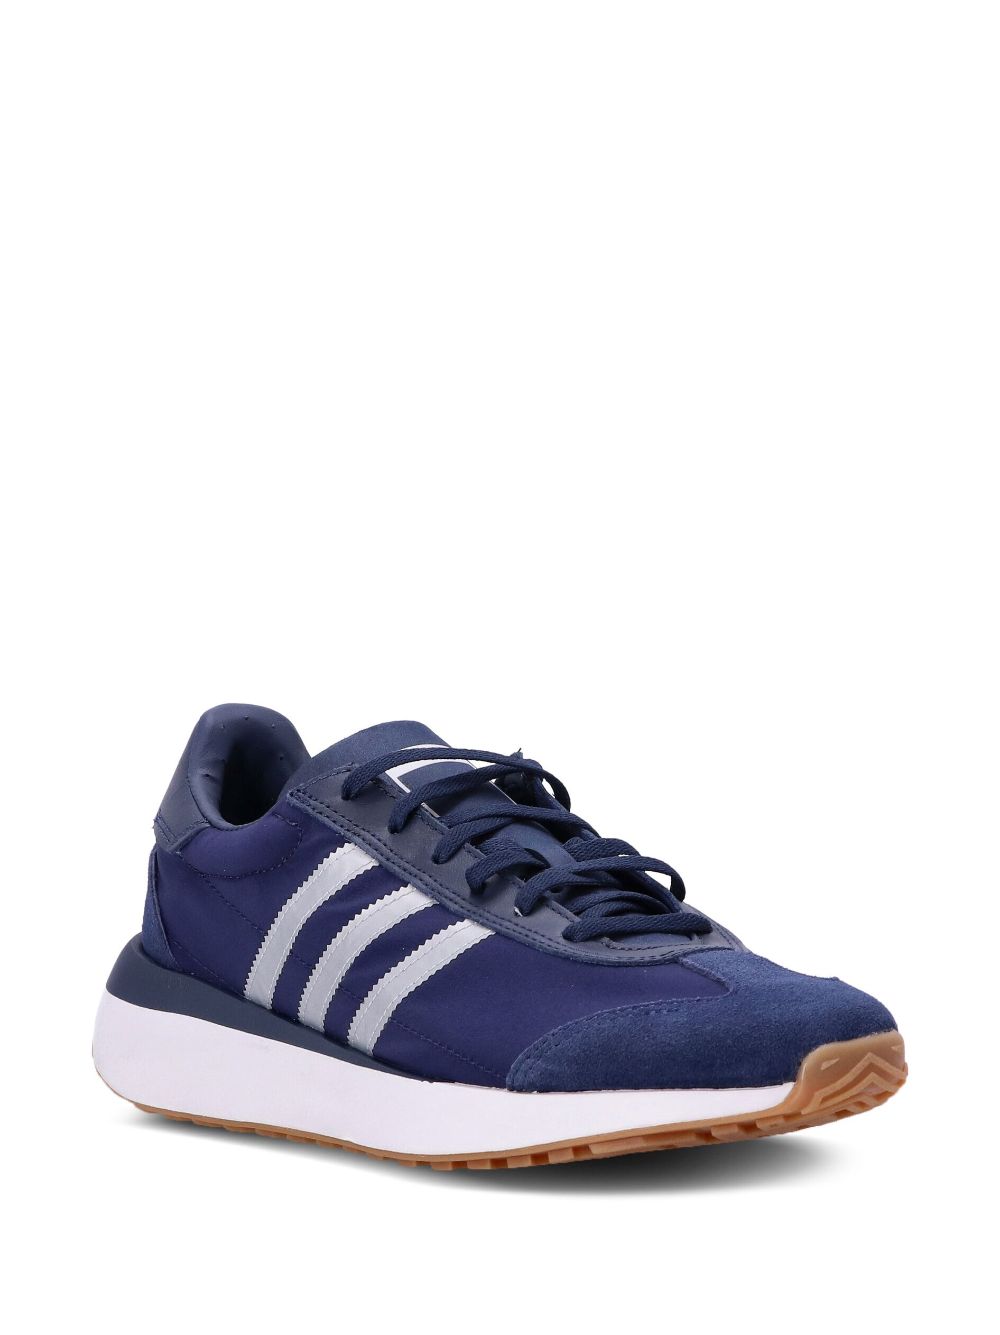 Adidas Originals Country Xlg Low-top Sneakers In Blue